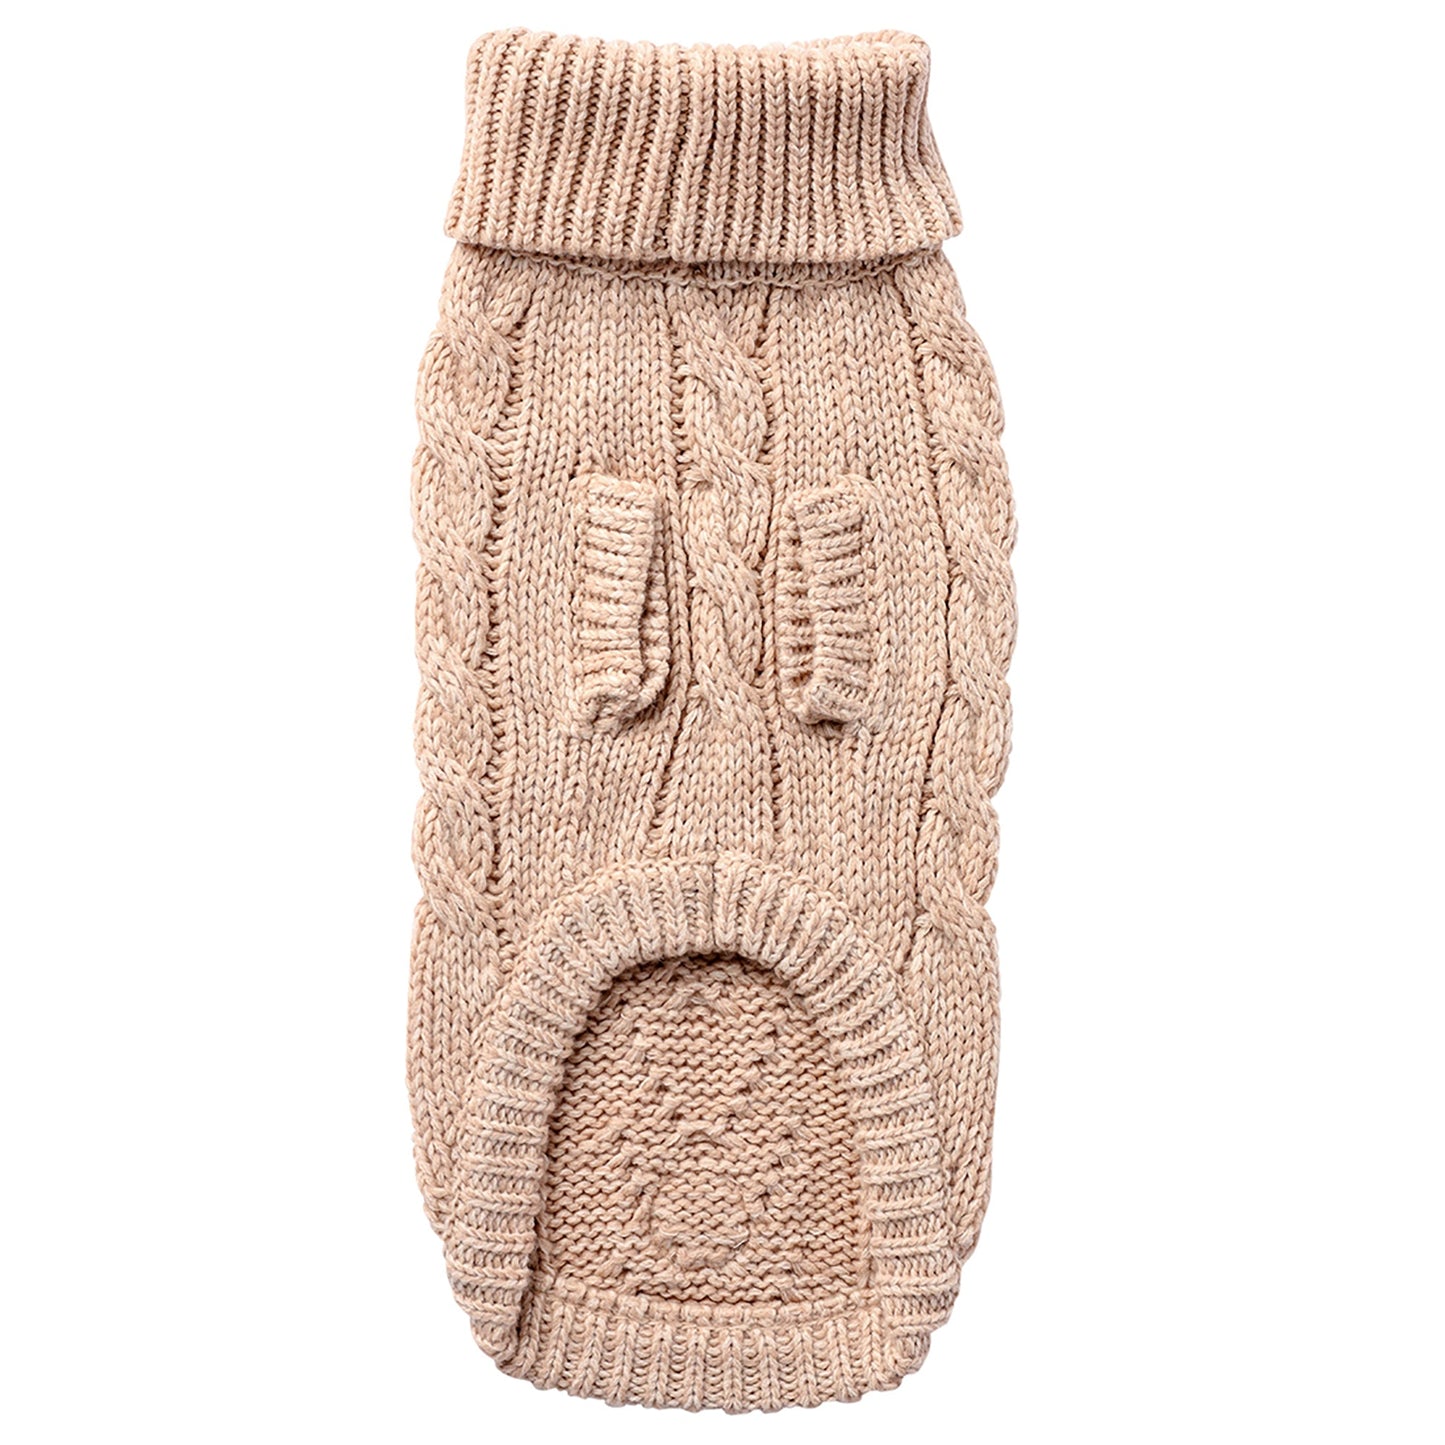 Chalet Dog Sweater - Oatmeal*